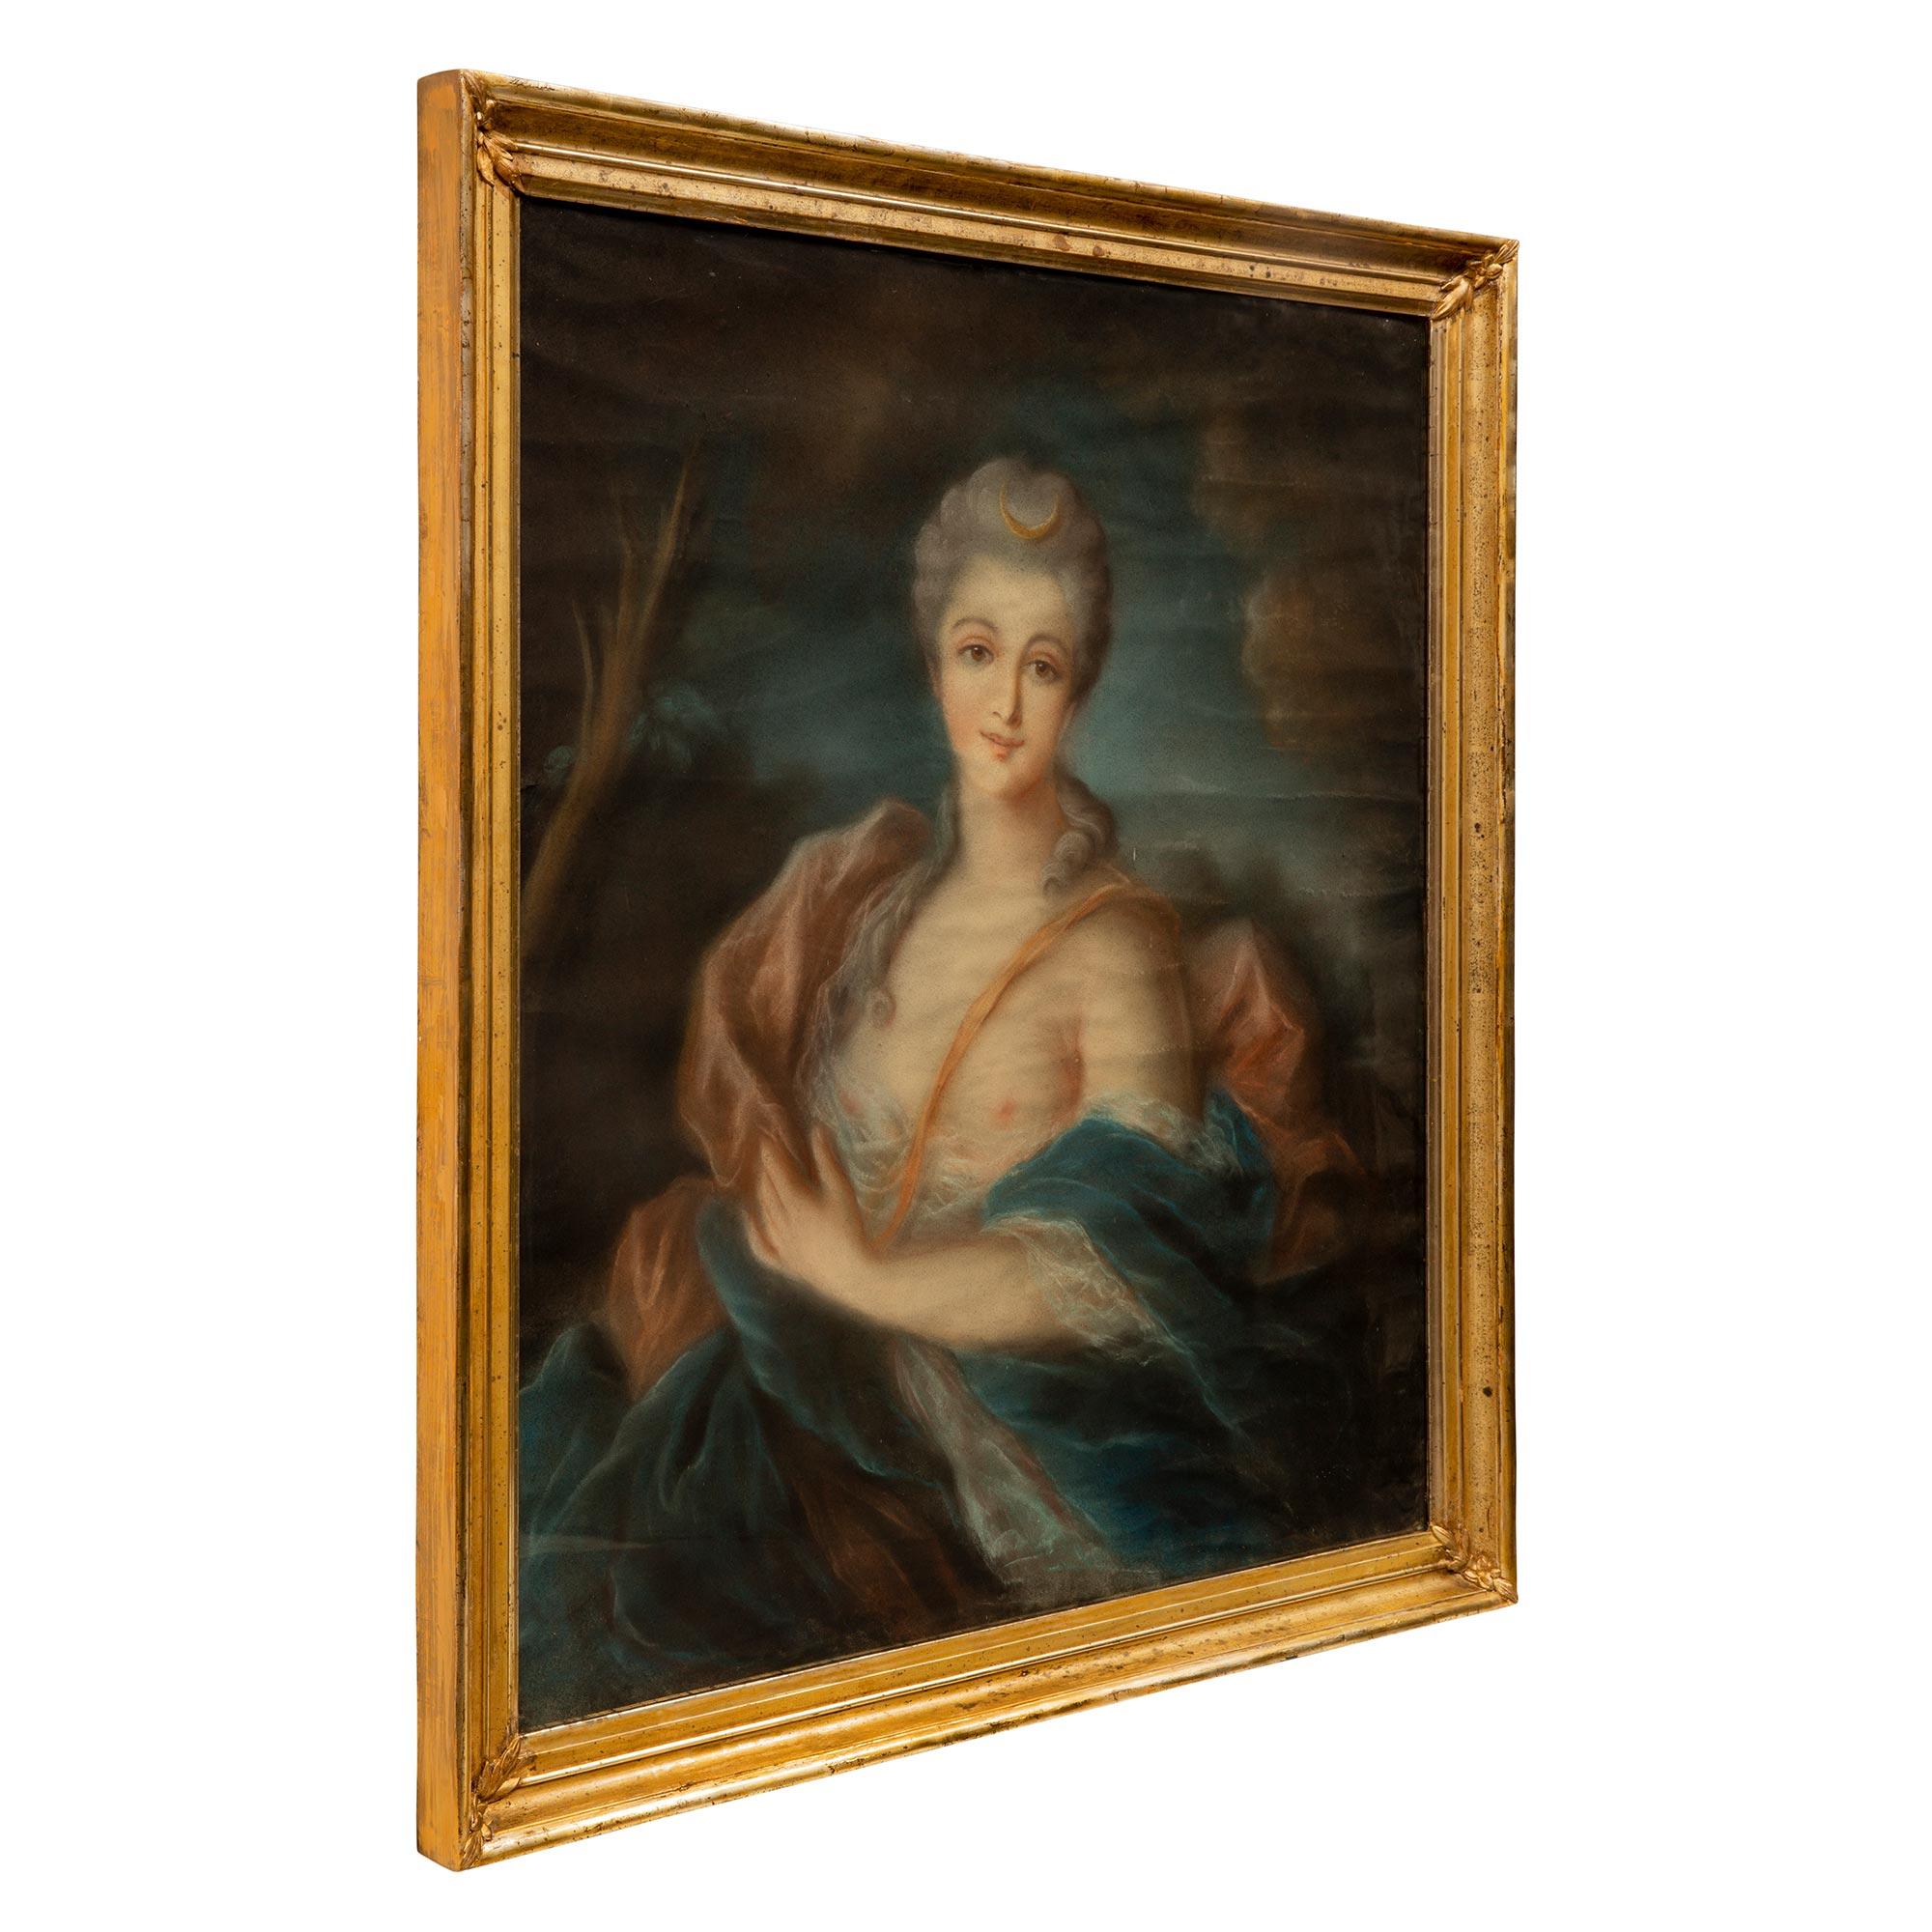 A lovely French 19th century Louis XVI st. pastel of Diana the Huntress. The beautiful pastel is set within its original Mecca frame with glass and a mottled design and elegant foliate carvings at each corner. The wonderfully executed pastel